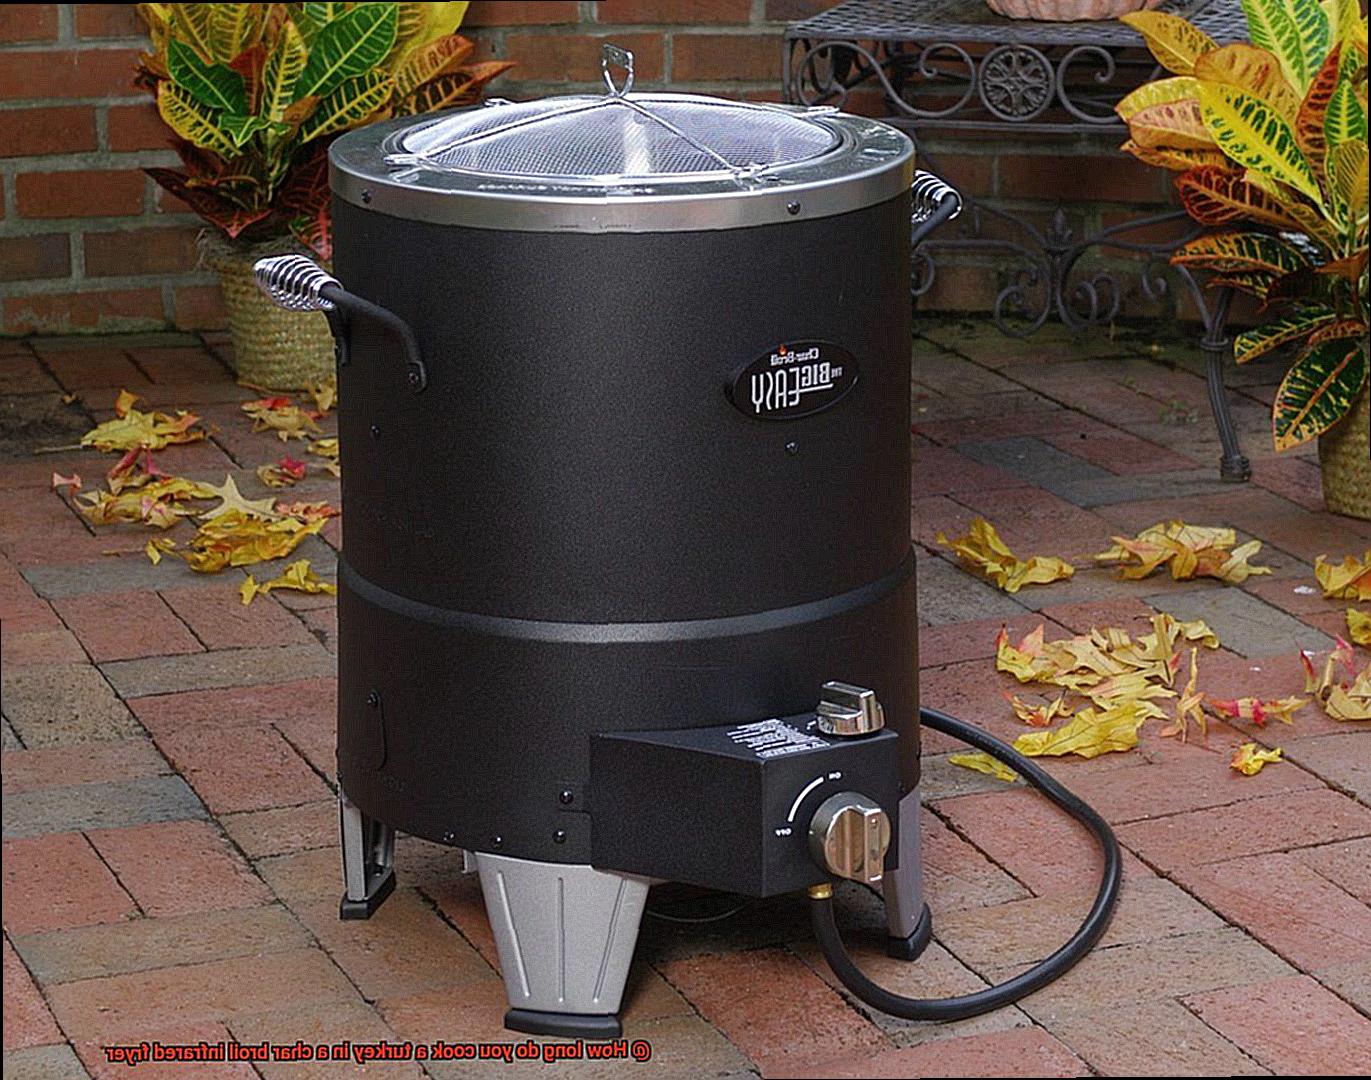 How long do you cook a turkey in a char broil infrared fryer-2